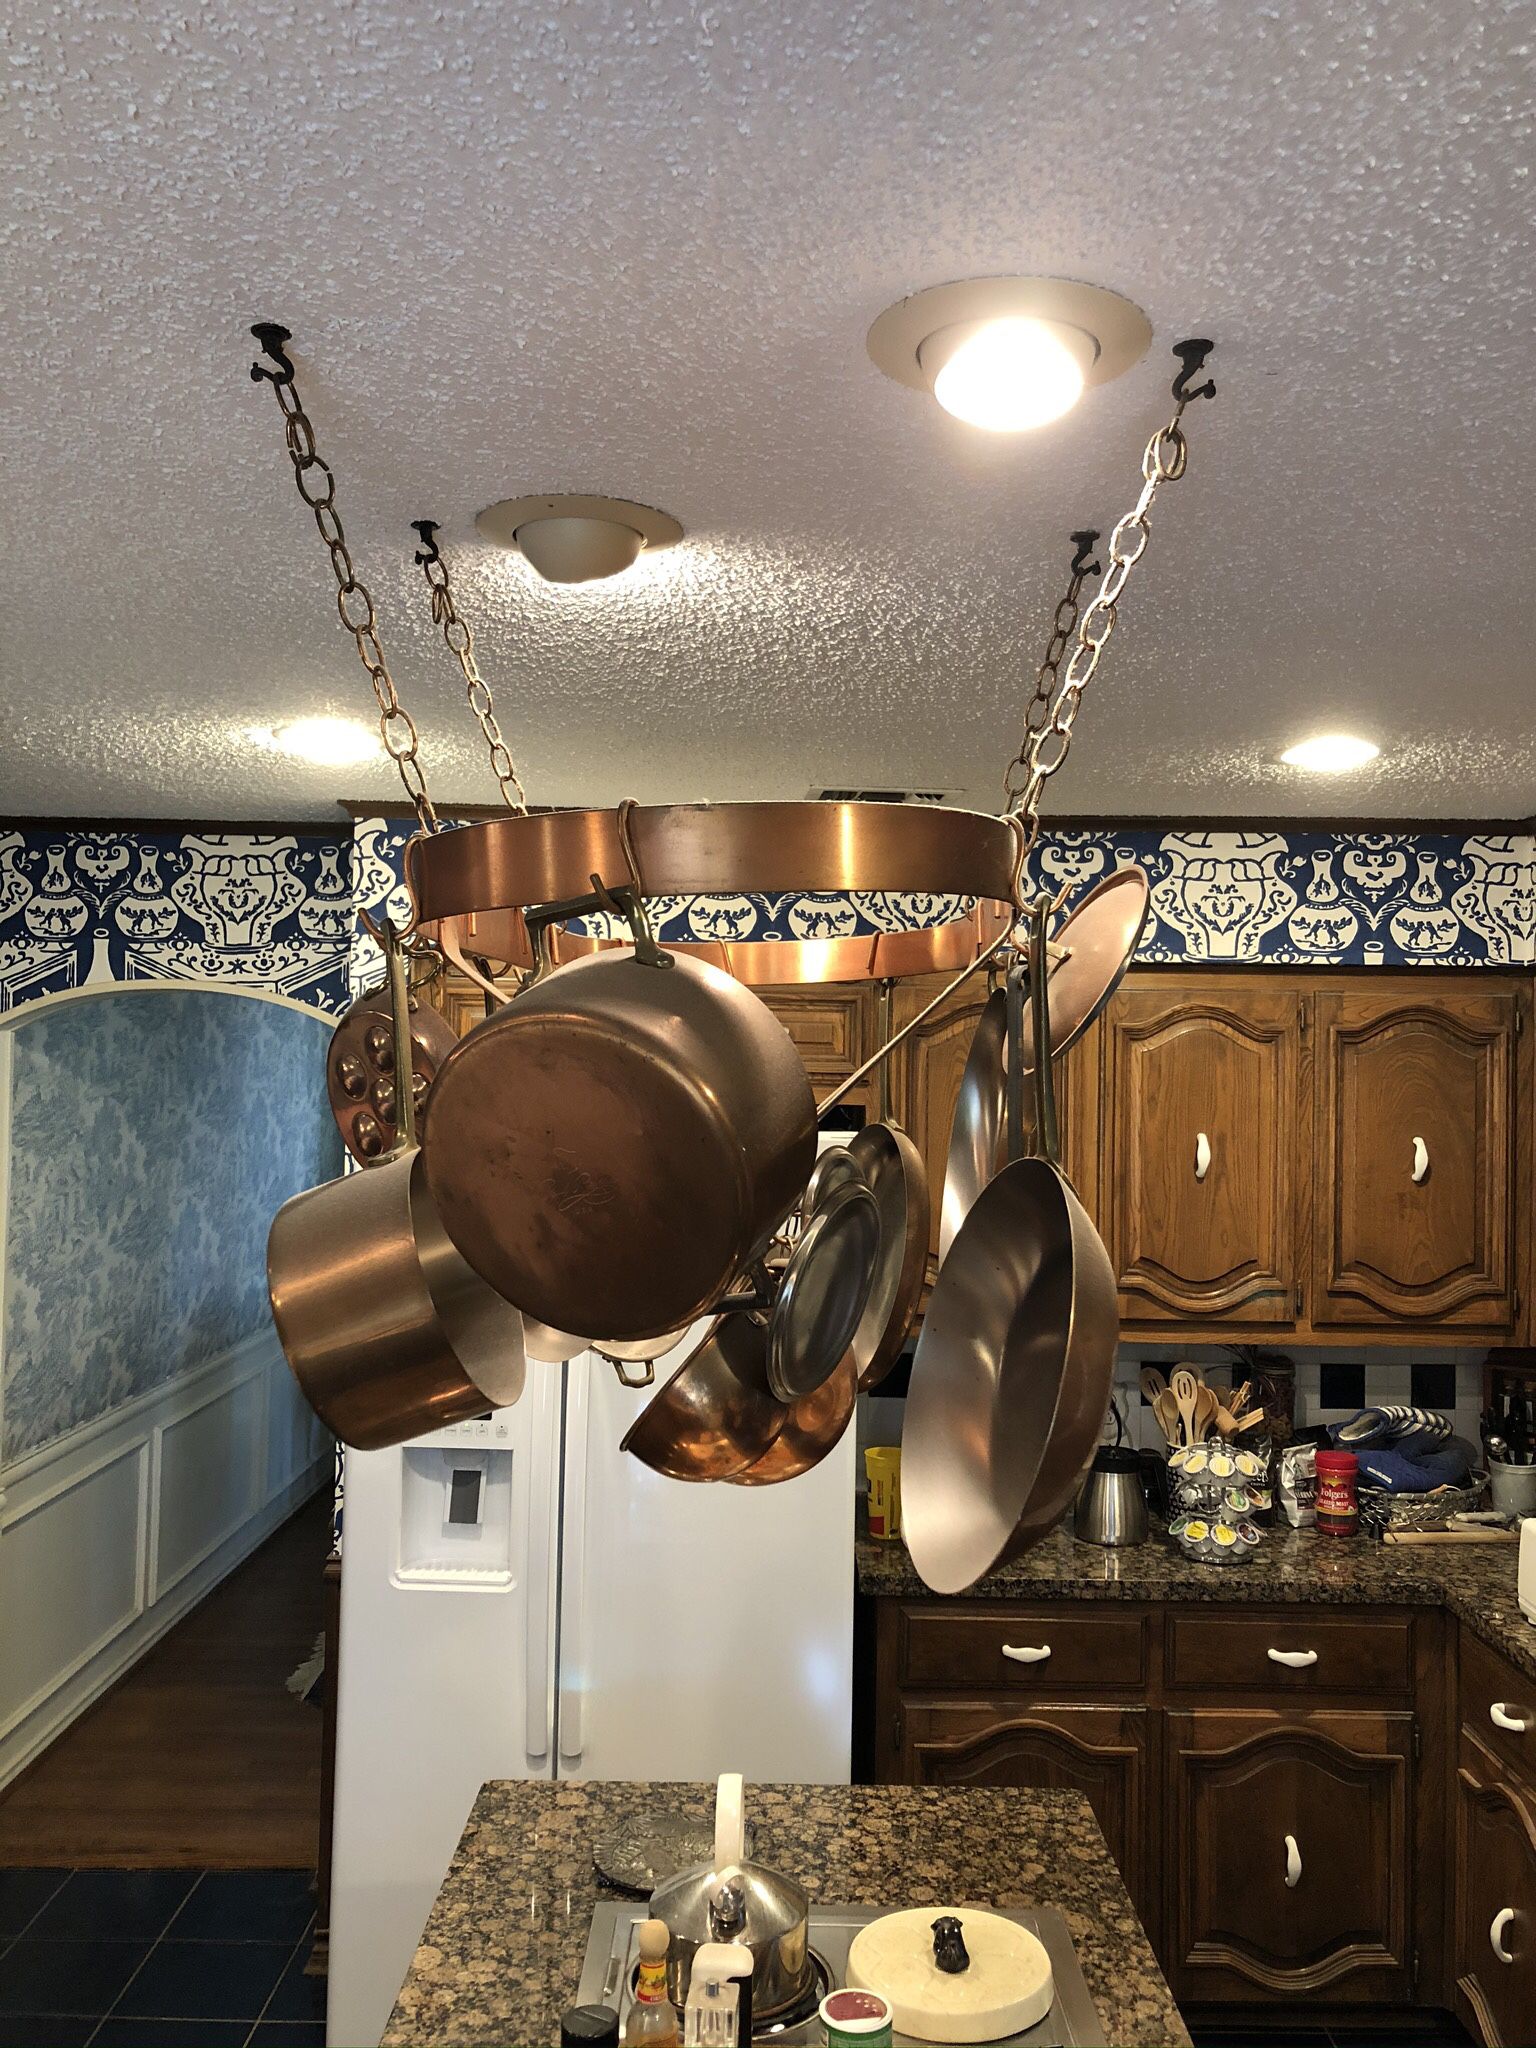 REAL Solid Copper Oval Hanging Pot Rack  